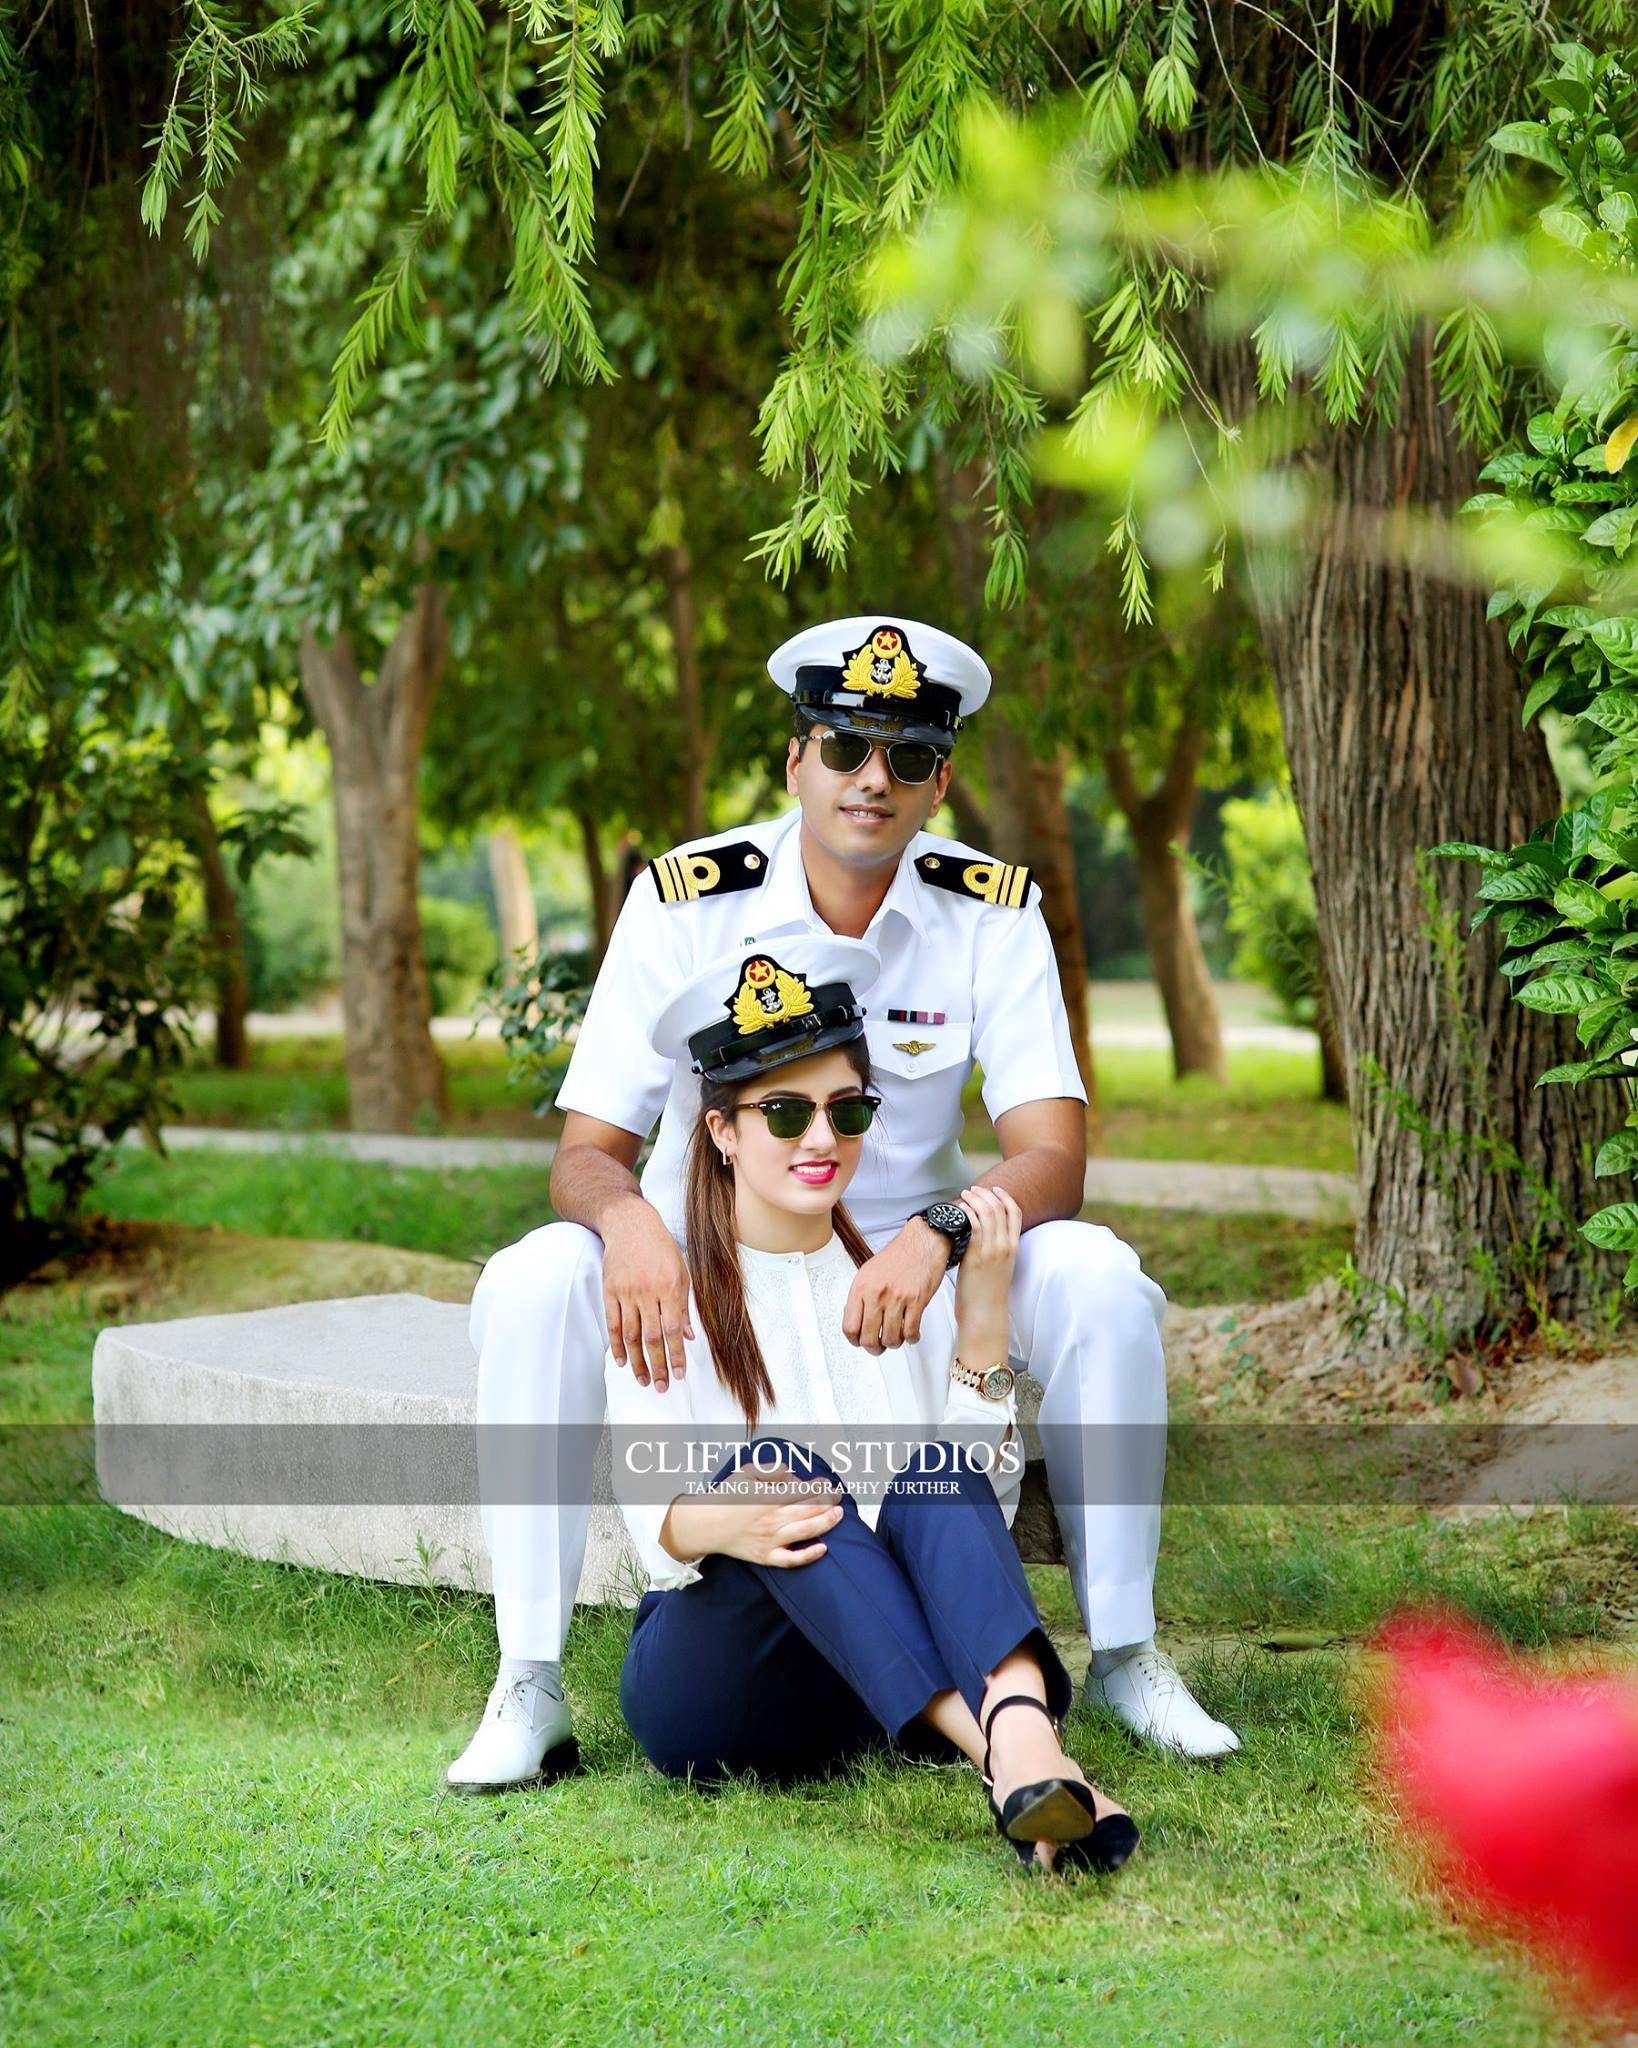 army love wallpapers,photograph,sitting,grass,lawn,leisure